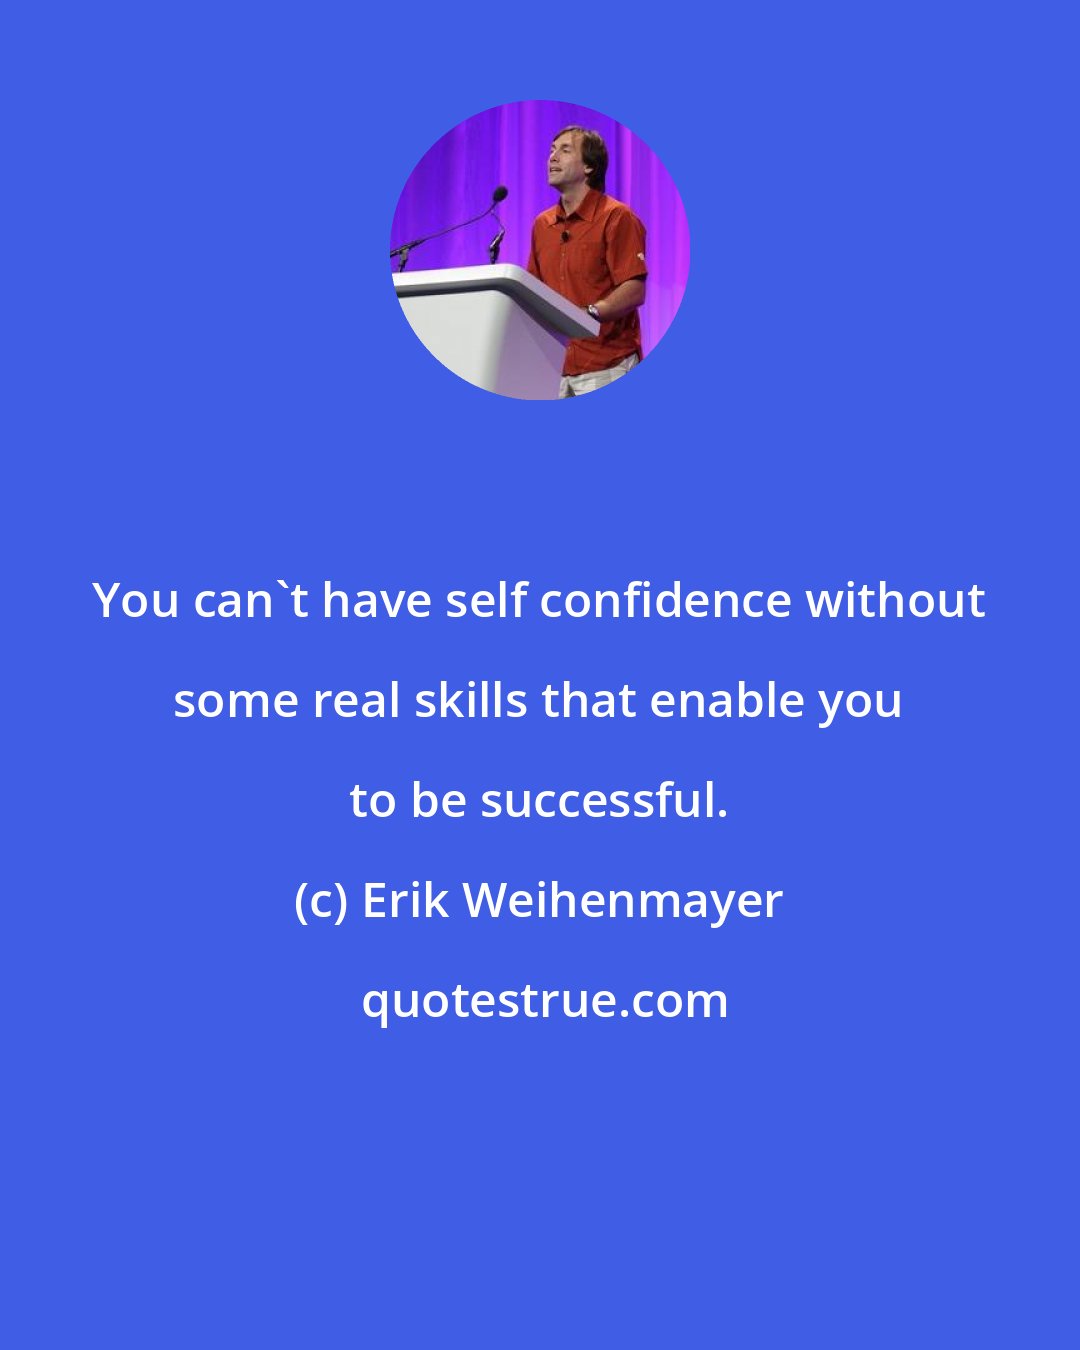 Erik Weihenmayer: You can't have self confidence without some real skills that enable you to be successful.